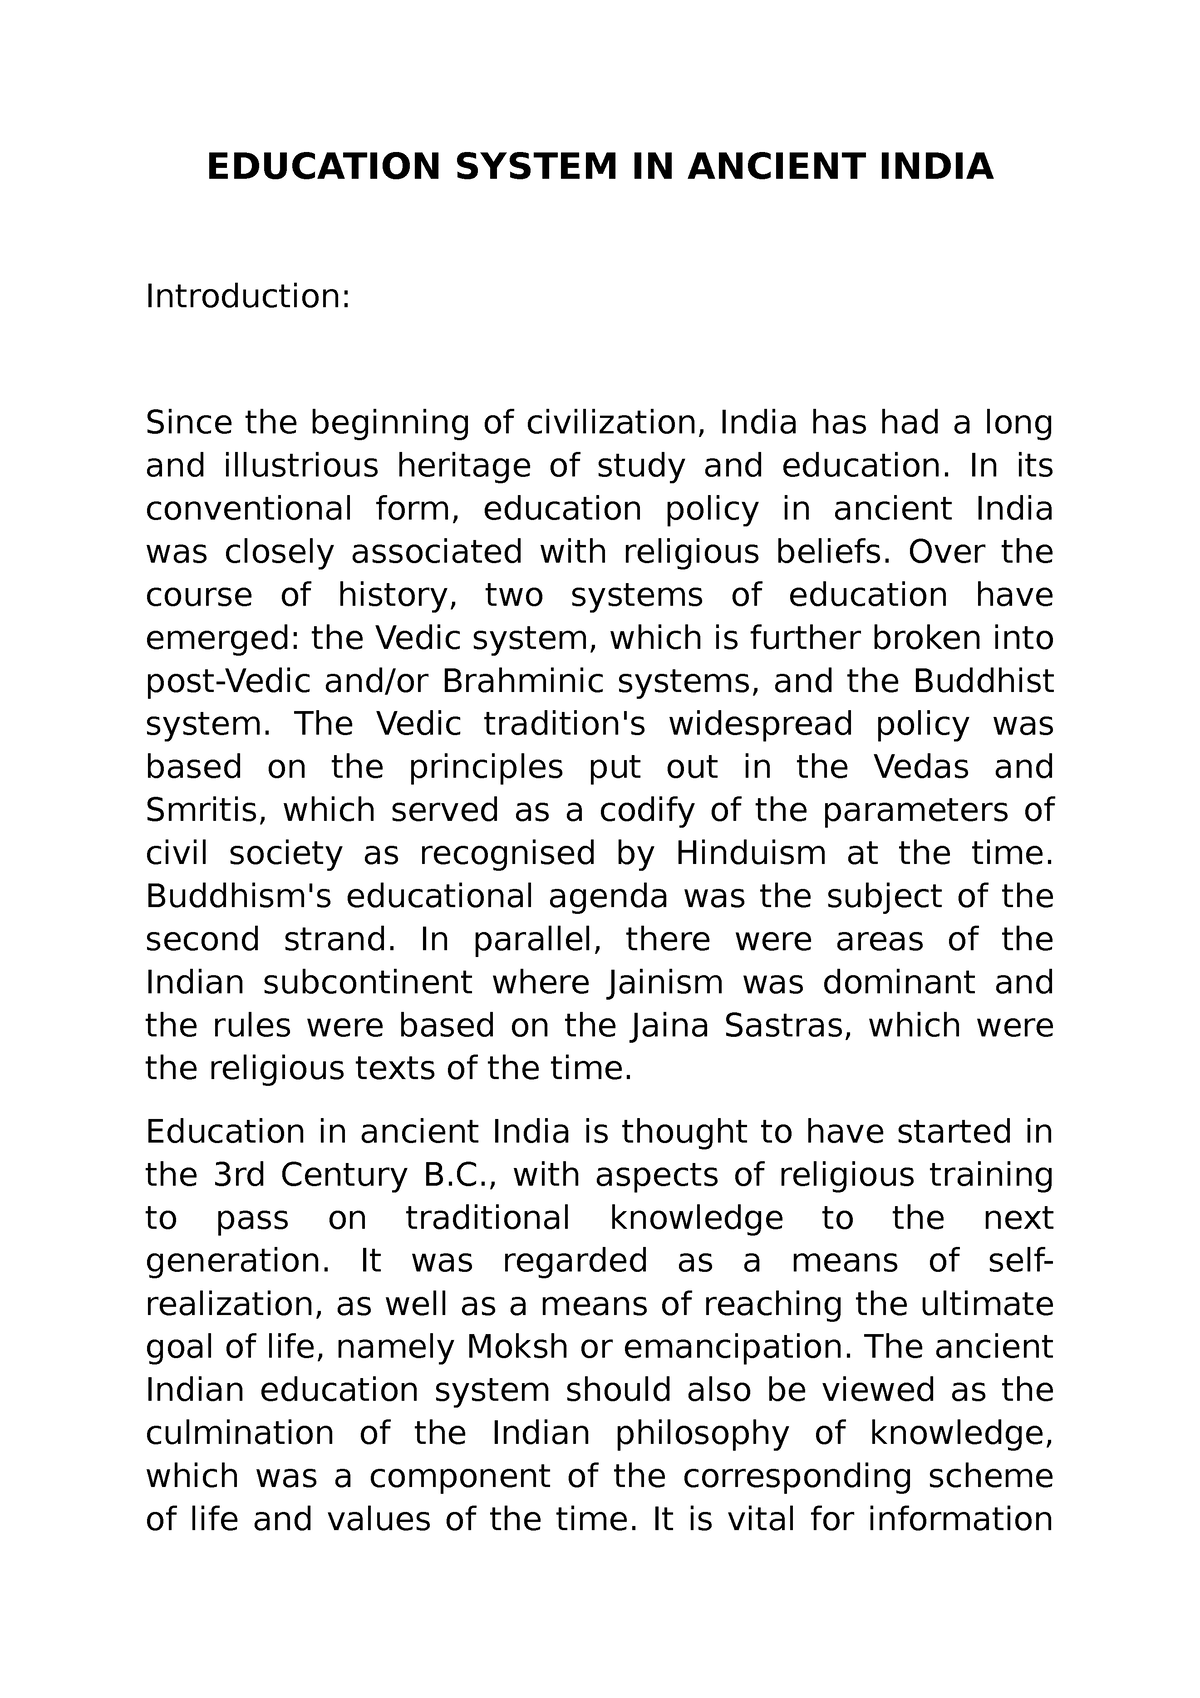 ancient education system of india essay